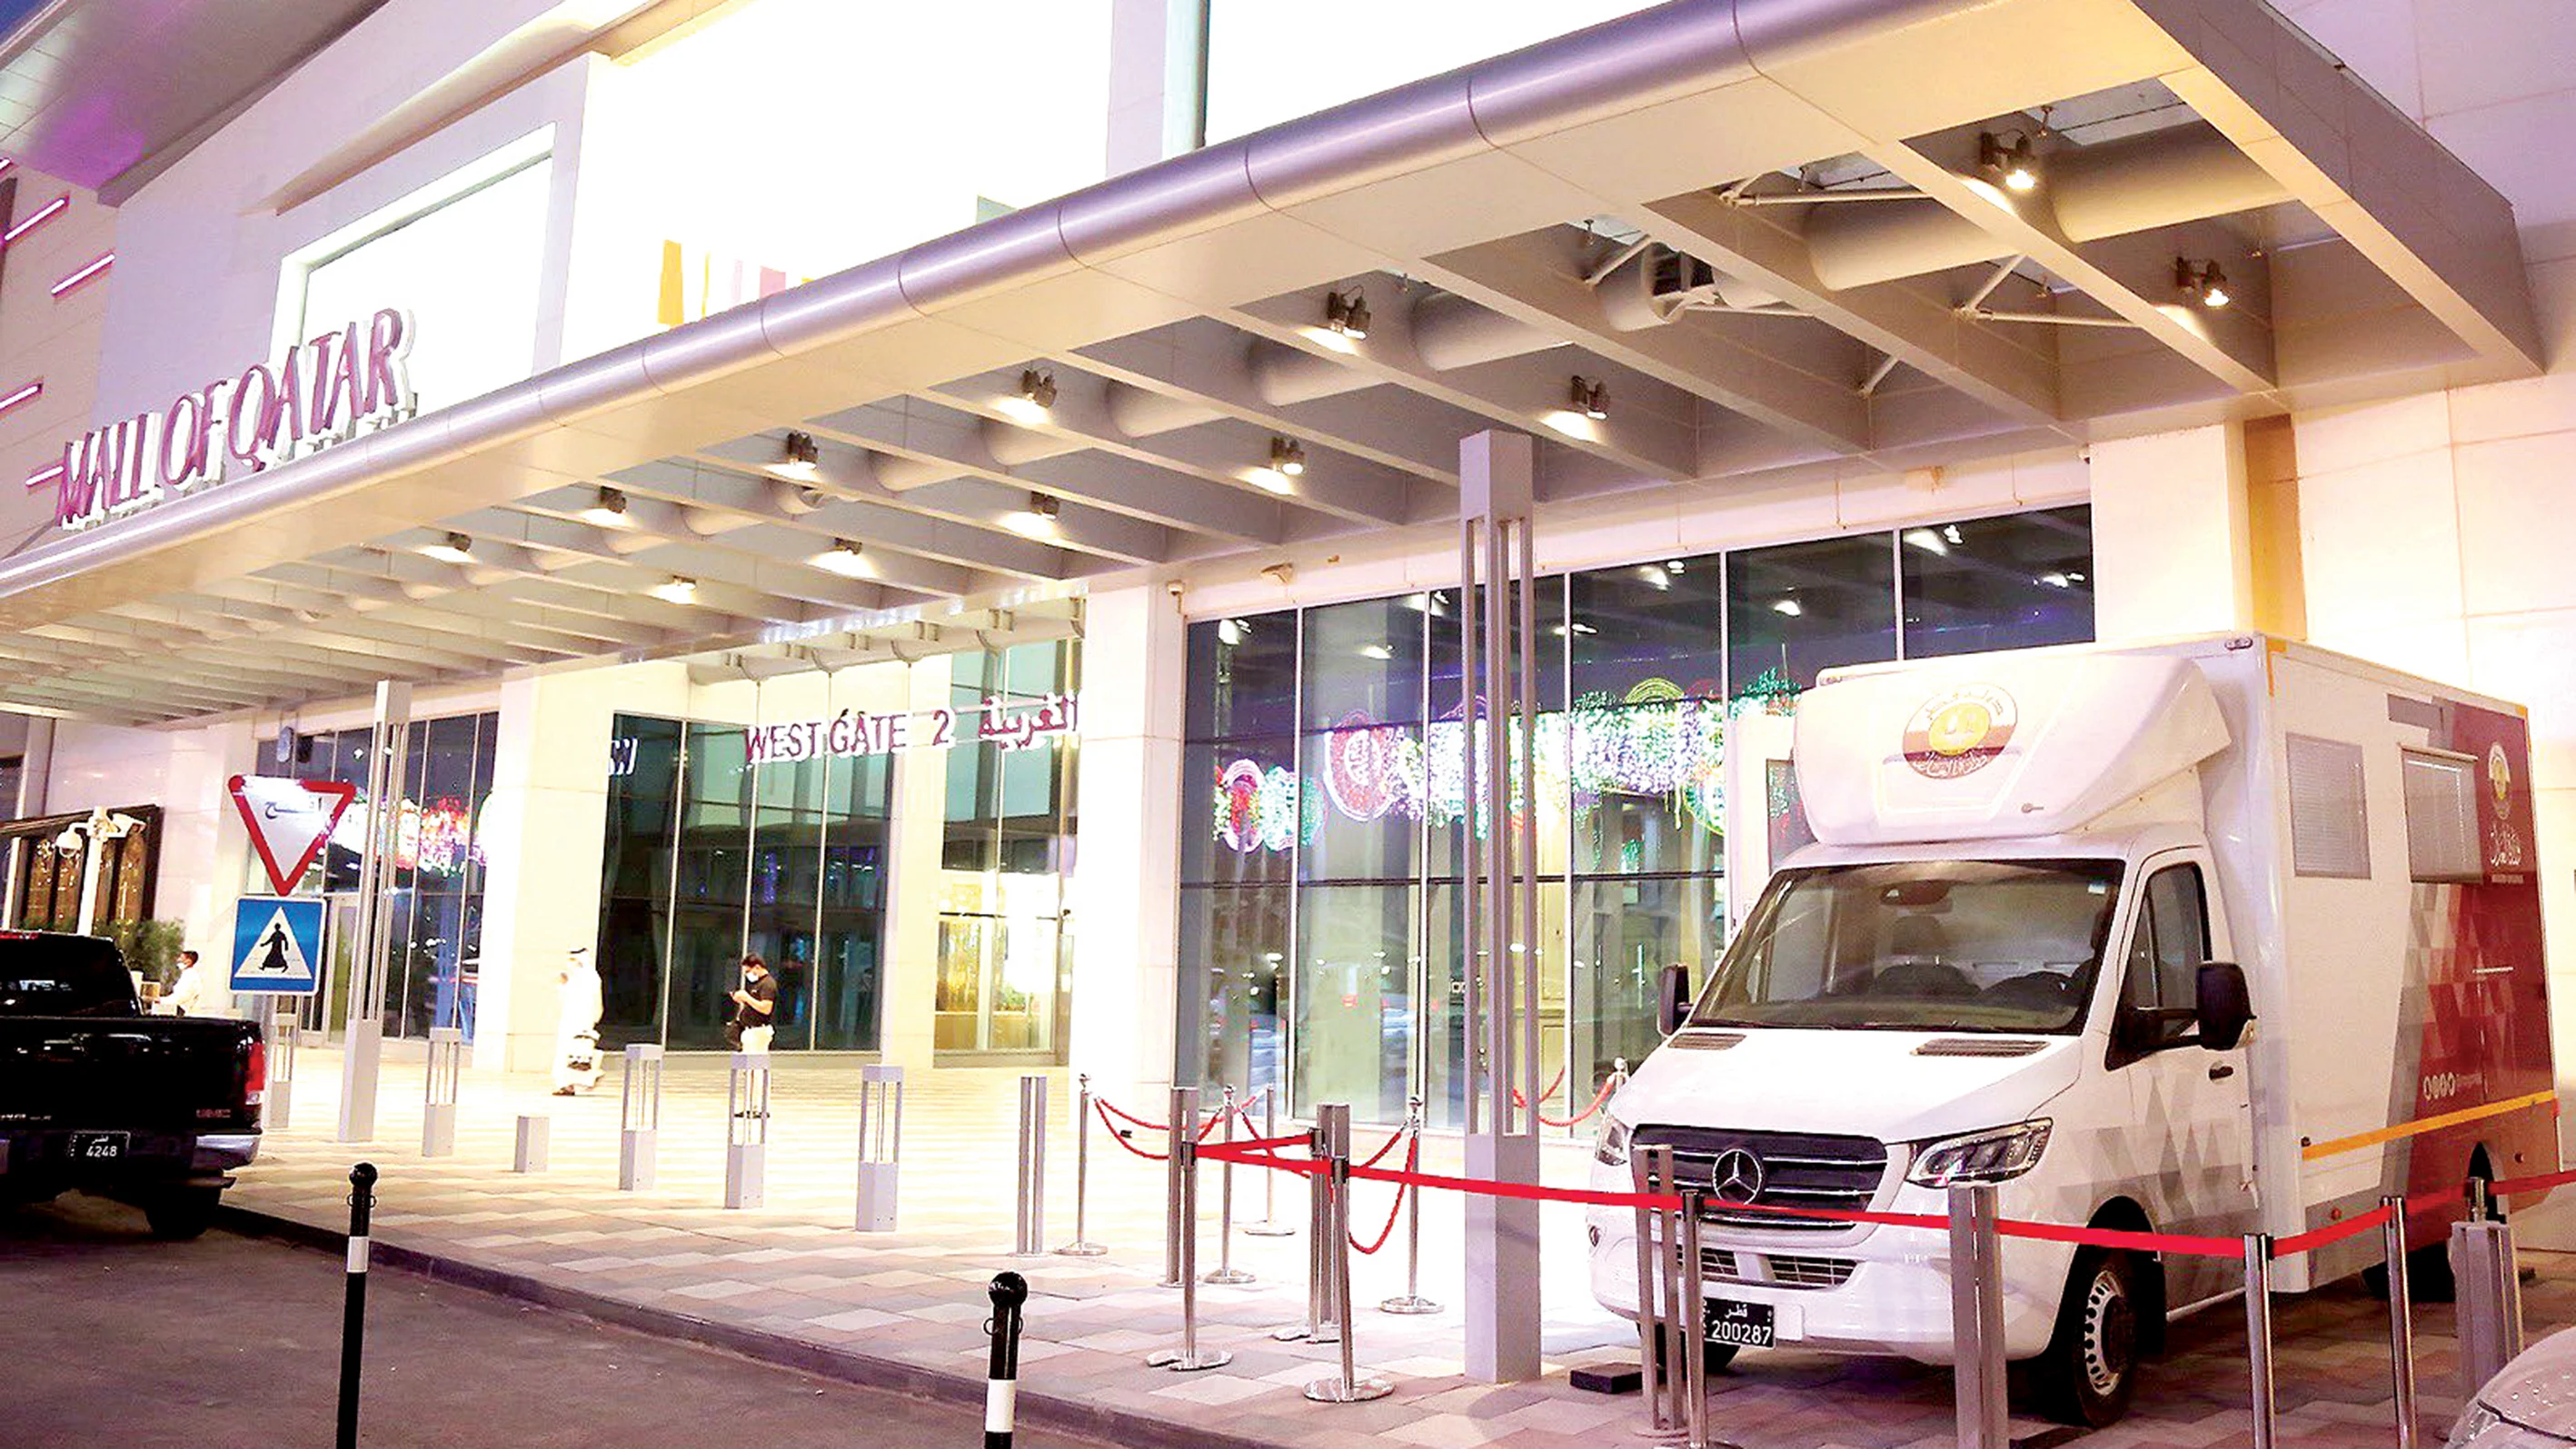 MoJ provides mobile office services at Mall of Qatar